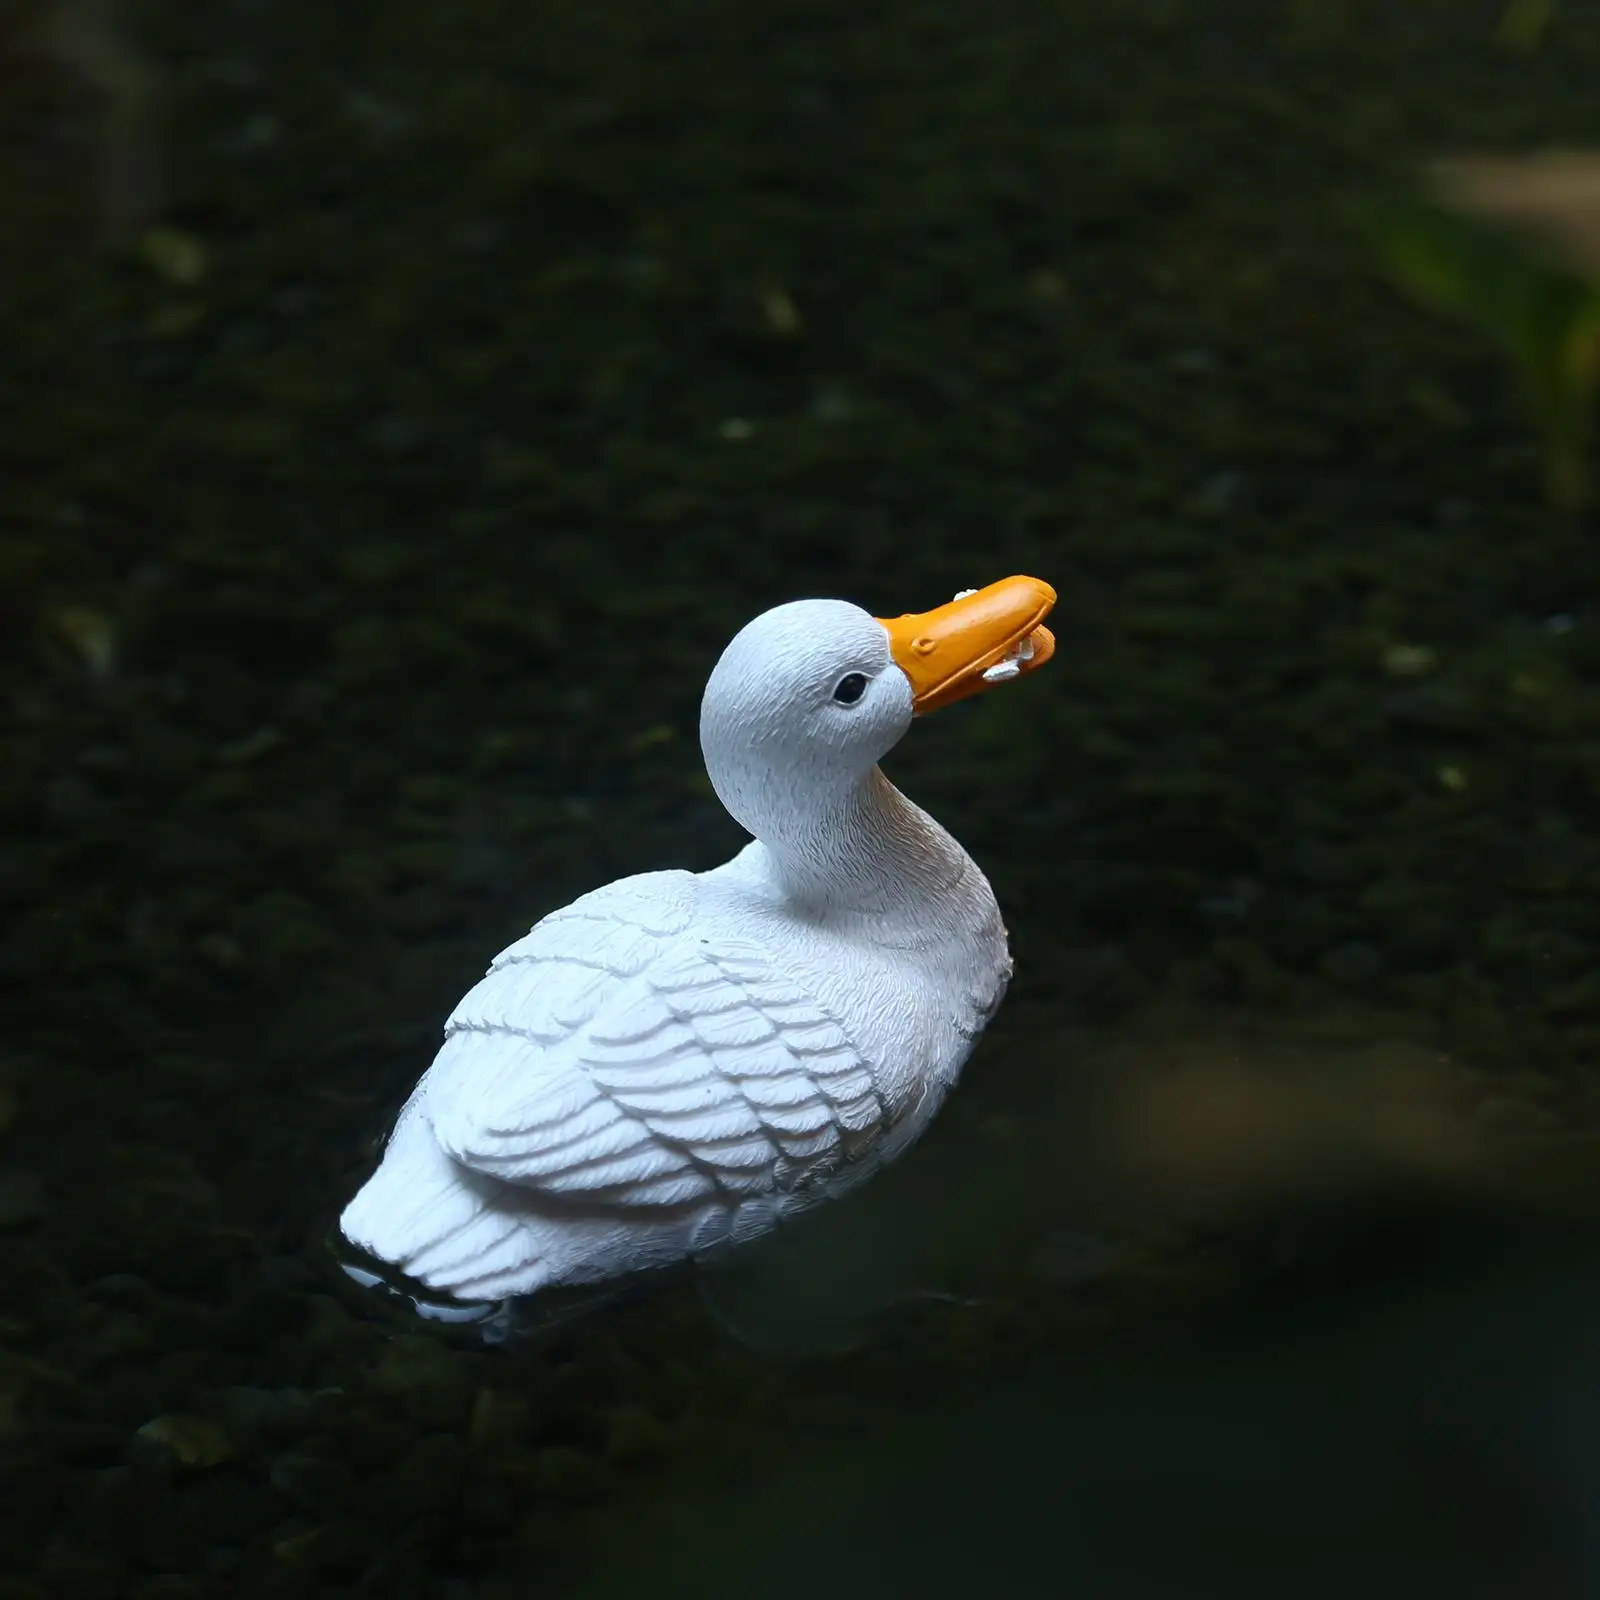 Simulation Floating Duck Ornaments Garden Statue Prop Lifelike Resin DIY Accessories Animal Figurines for Landscape Office Table